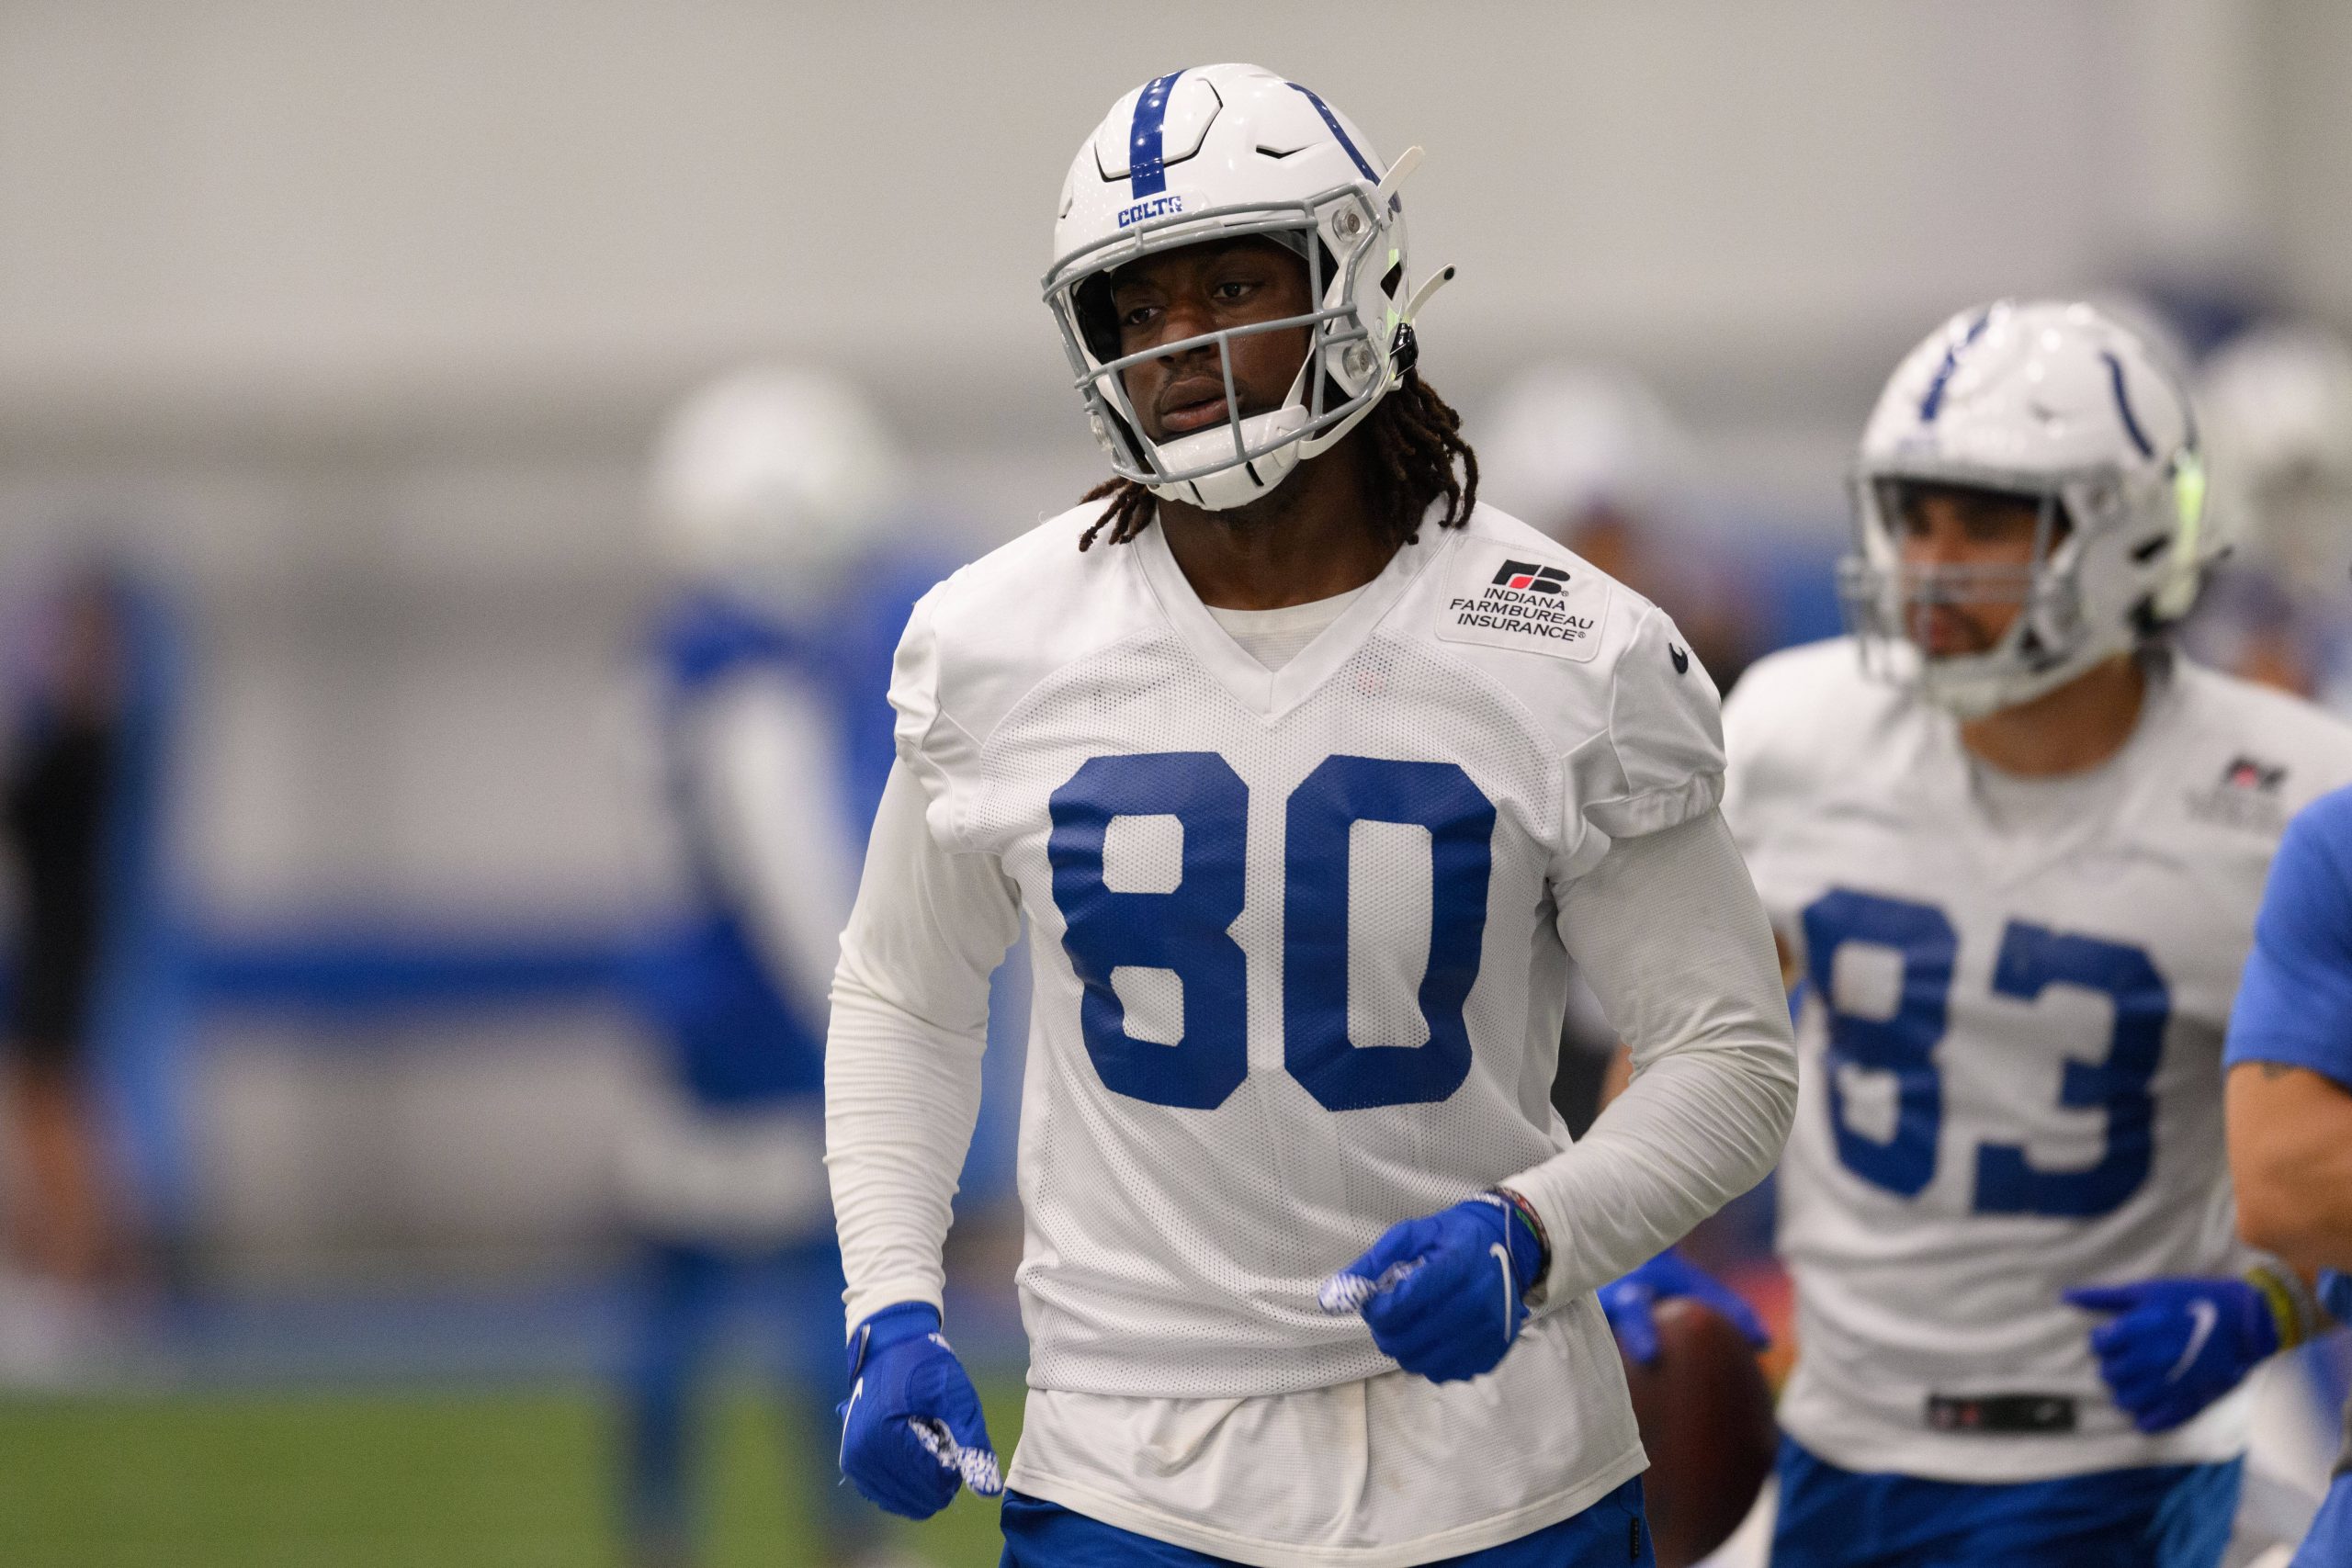 INDIANAPOLIS, IN - MAY 25: Indianapolis Colts tight end Jelani Woods 80 runs through a drill during the Indianapolis Colts OTA offseason workouts on May 25, 2022 at the Indiana Farm Bureau Football Center in Indianapolis, IN. Photo by Zach Bolinger/Icon Sportswire NFL, American Football Herren, USA MAY 25 Indianapolis Colts OTA Offseason Workouts Icon2205251509